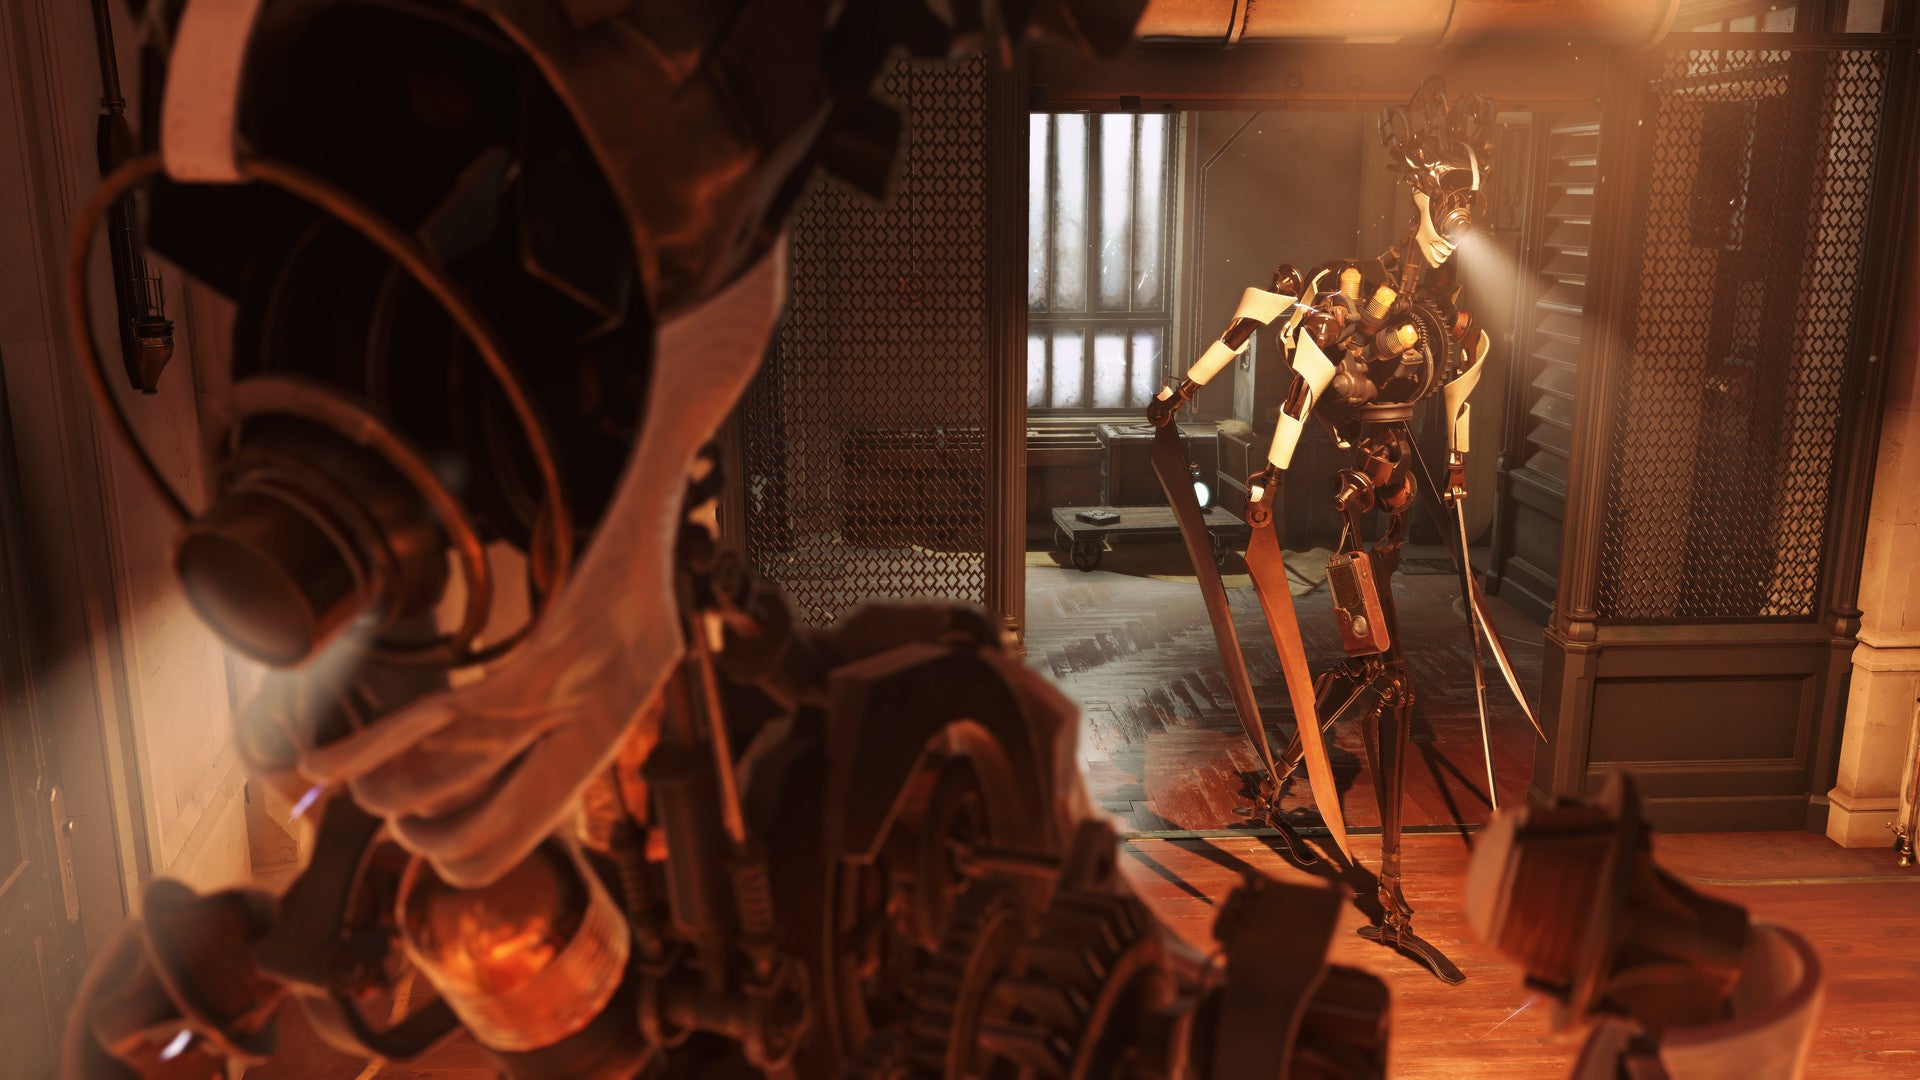 Two automata with blade arms walk into a room in Dishonored: Death Of The Outsider.